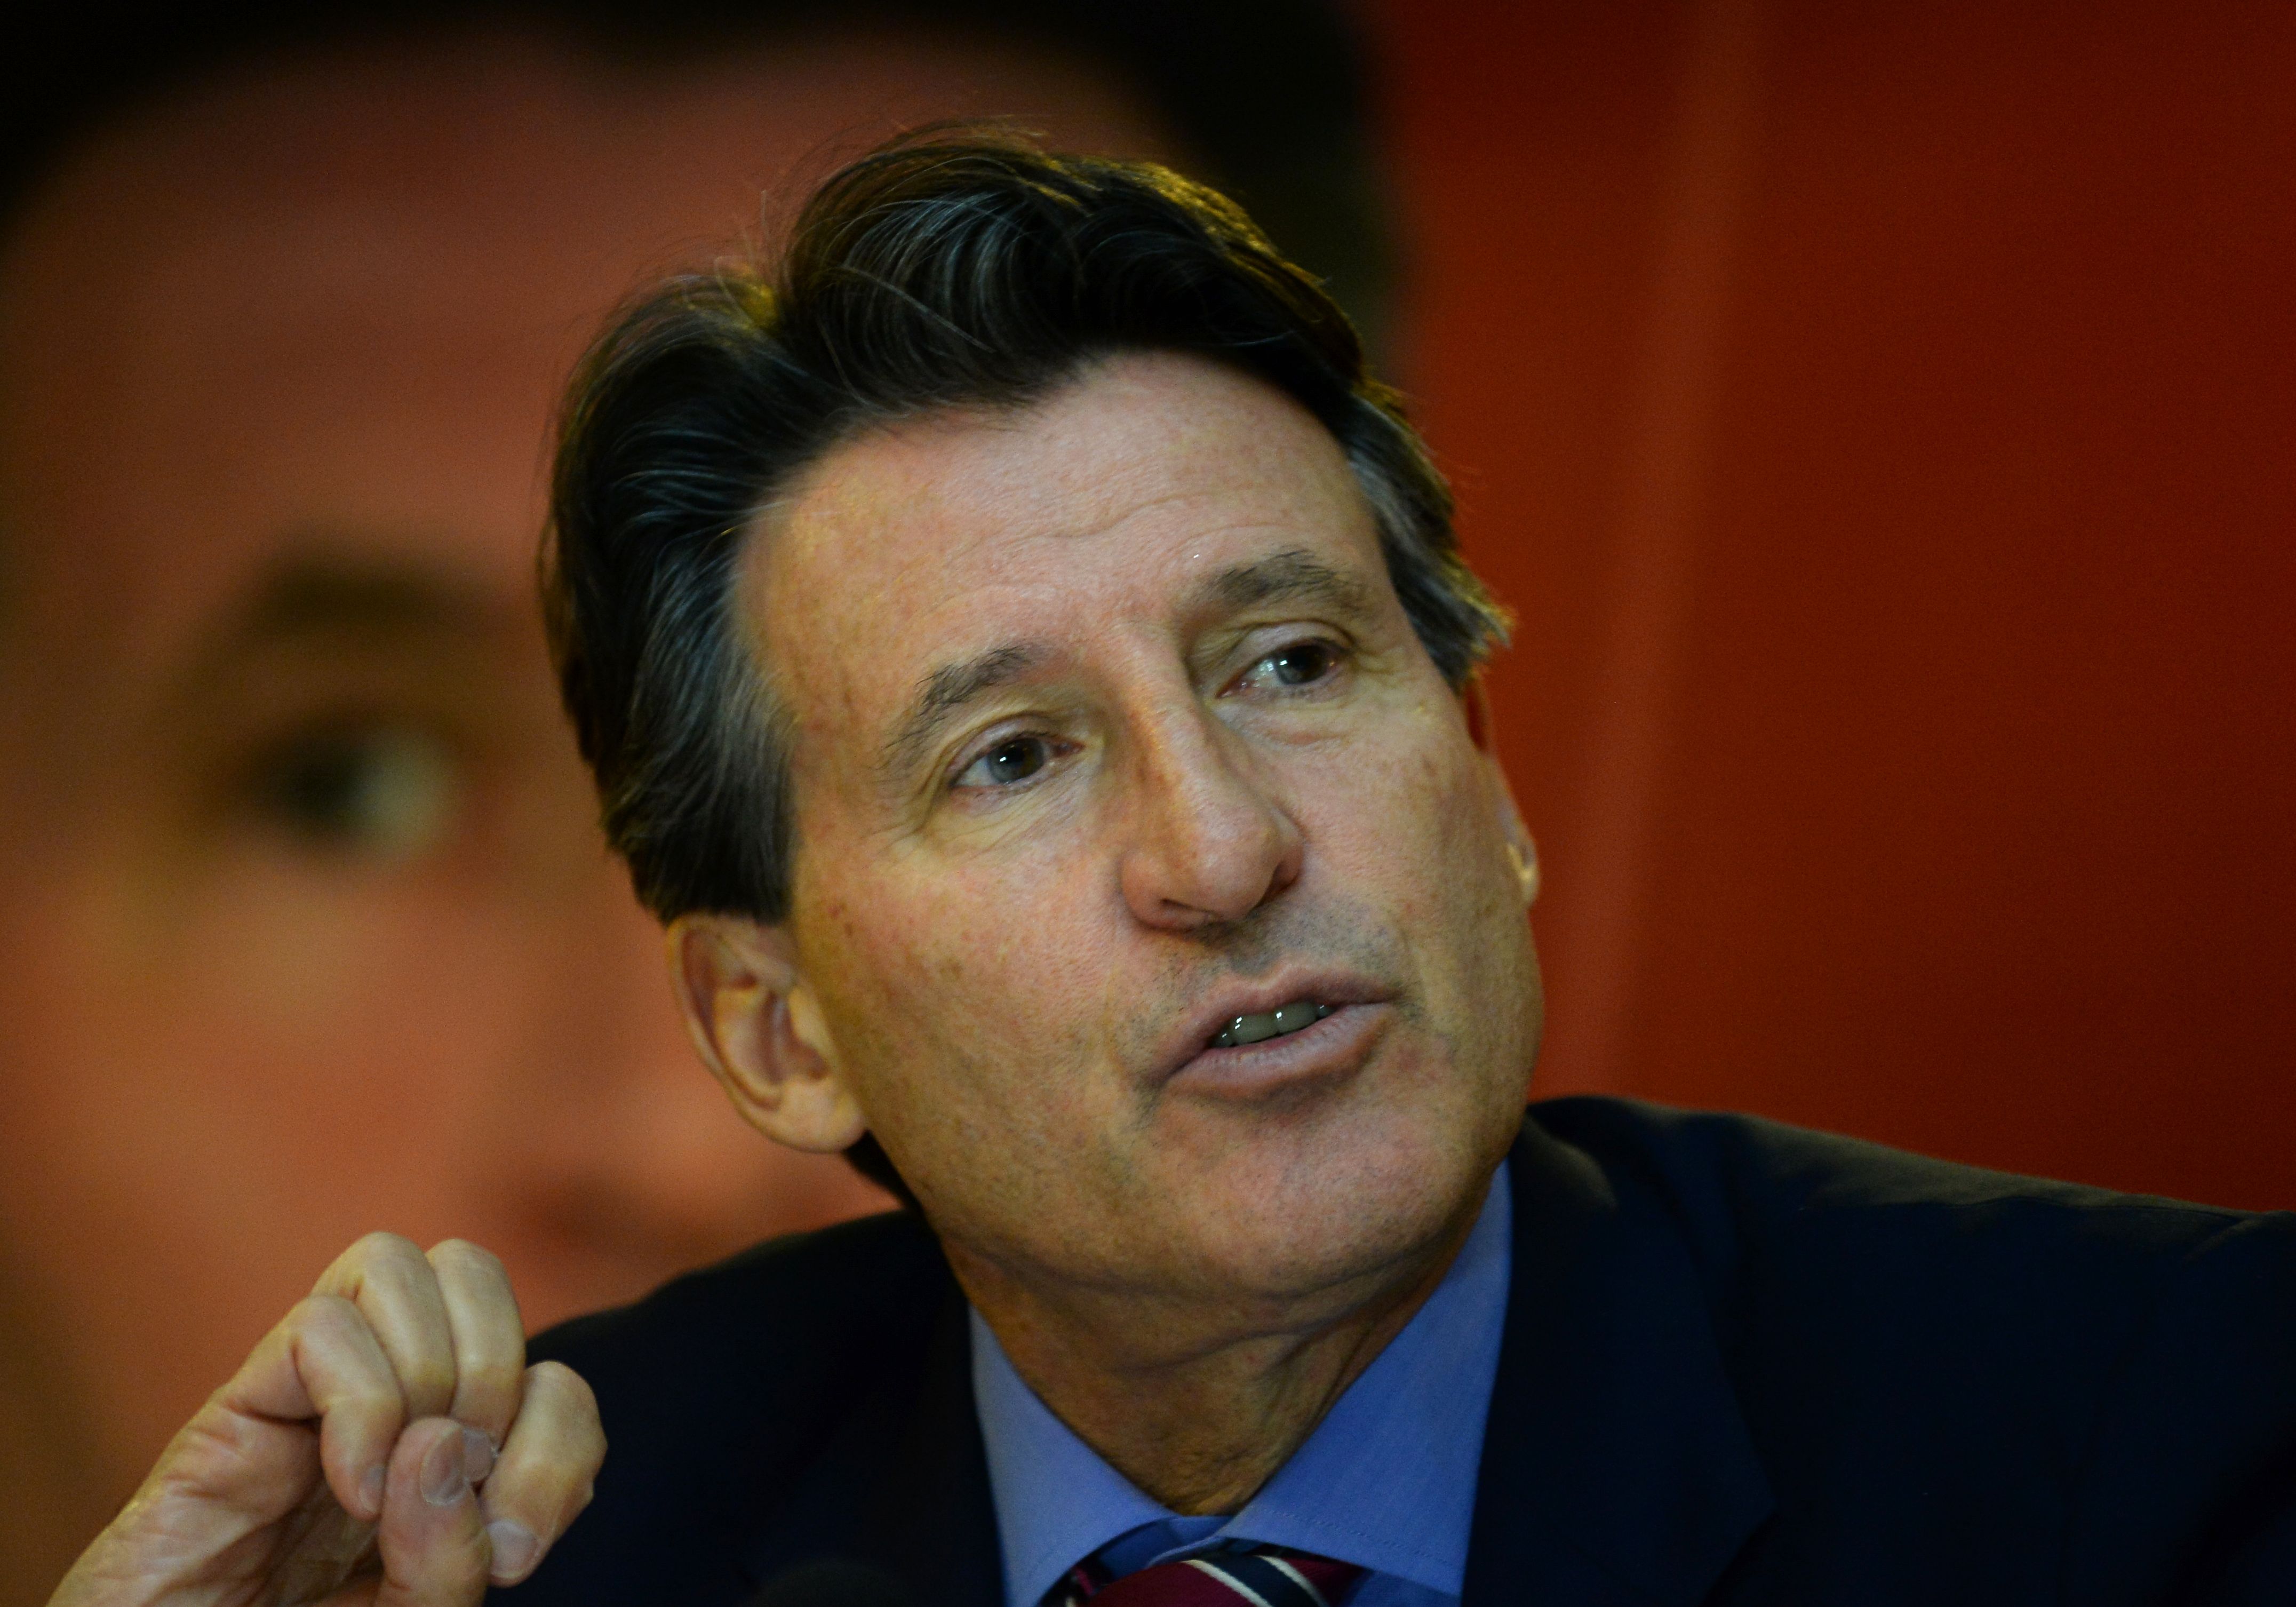 TO GO WITH AFP STORY FILES) This file photo taken on October 05, 2015 shows International Association of Athletics Federations (IAAF) president Sebastian Coe as he addresses a press conference in New Delhi on October 5, 2015. Embattled IAAF president Sebastian Coe has insisted that his organisation did not cover up positive drugs tests by Russian athletes, in television interviews aired on January 13, 2016. Claims have emerged that the IAAF (International Association of Athletics Federations) was aware of illegal and dangerous levels of doping in Russian athletics as far back as 2009. A second report by a World Anti-doping Agency (WADA) independent commission to be published on January 14, 2016 will shine further light on doping in Russian athletics, but Coe says that the IAAF has nothing to hide. / AFP / SAJJAD HUSSAIN